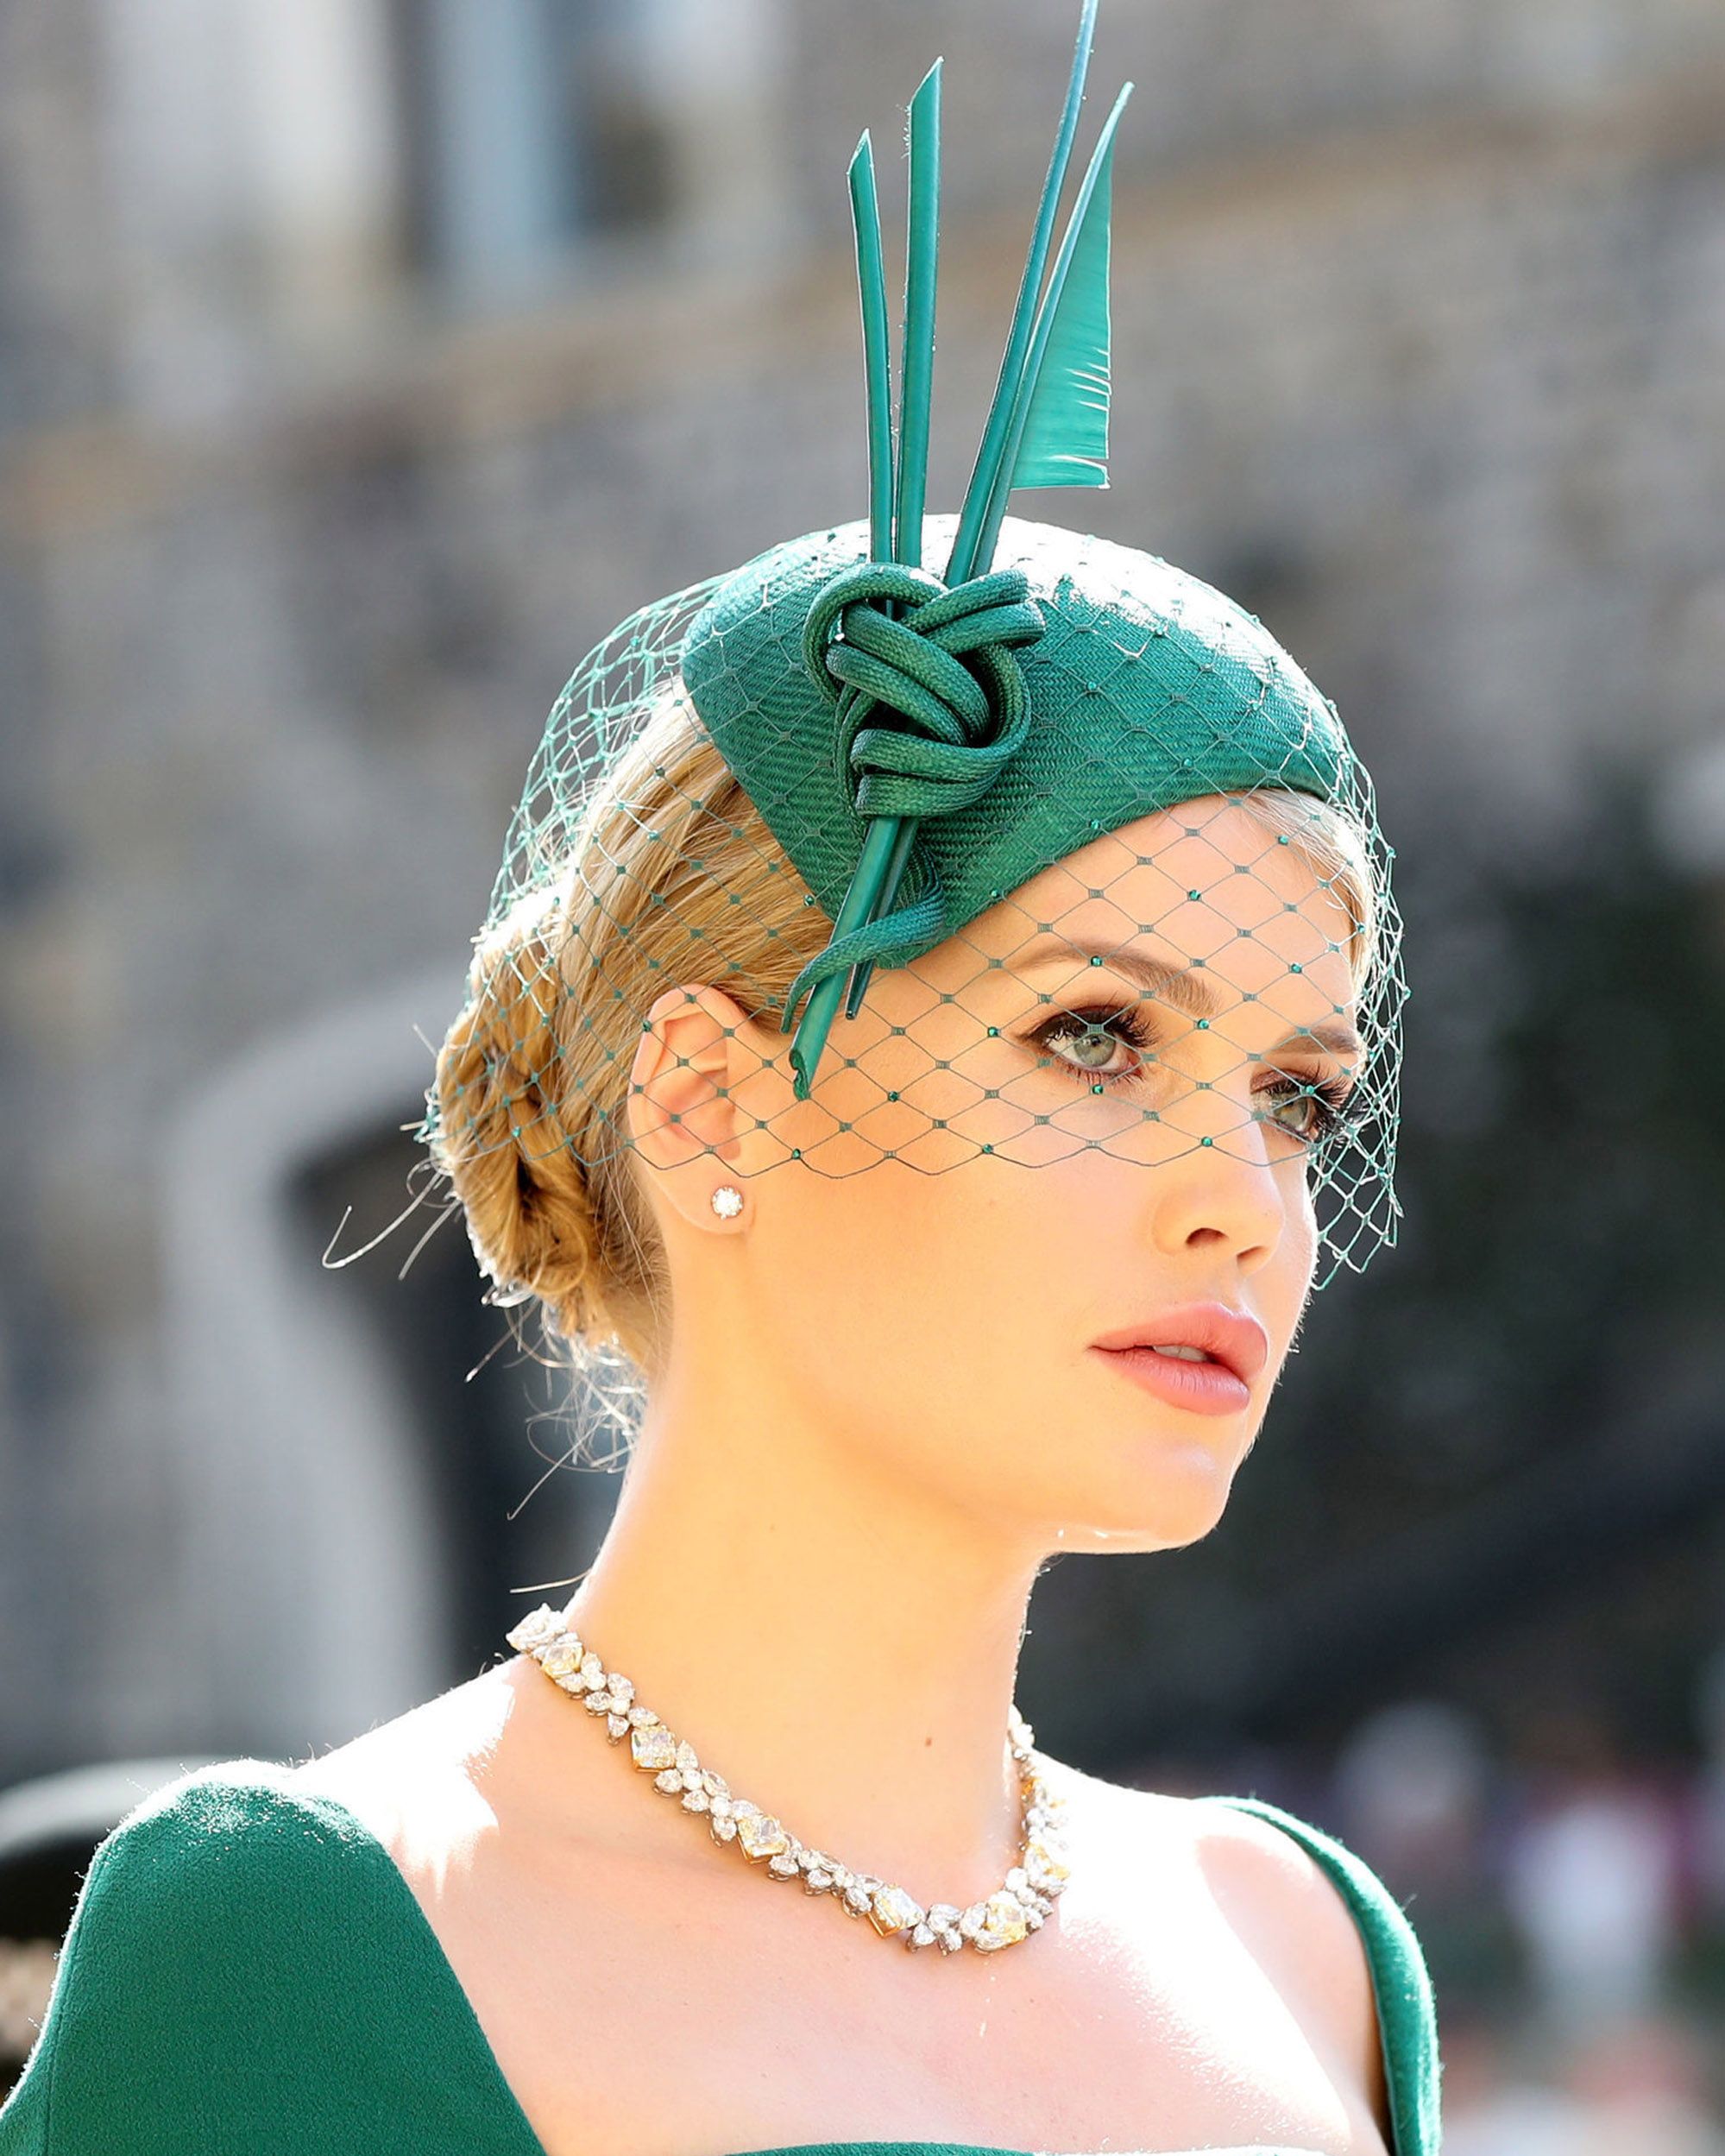 Royal wedding: See the best hats and fascinators